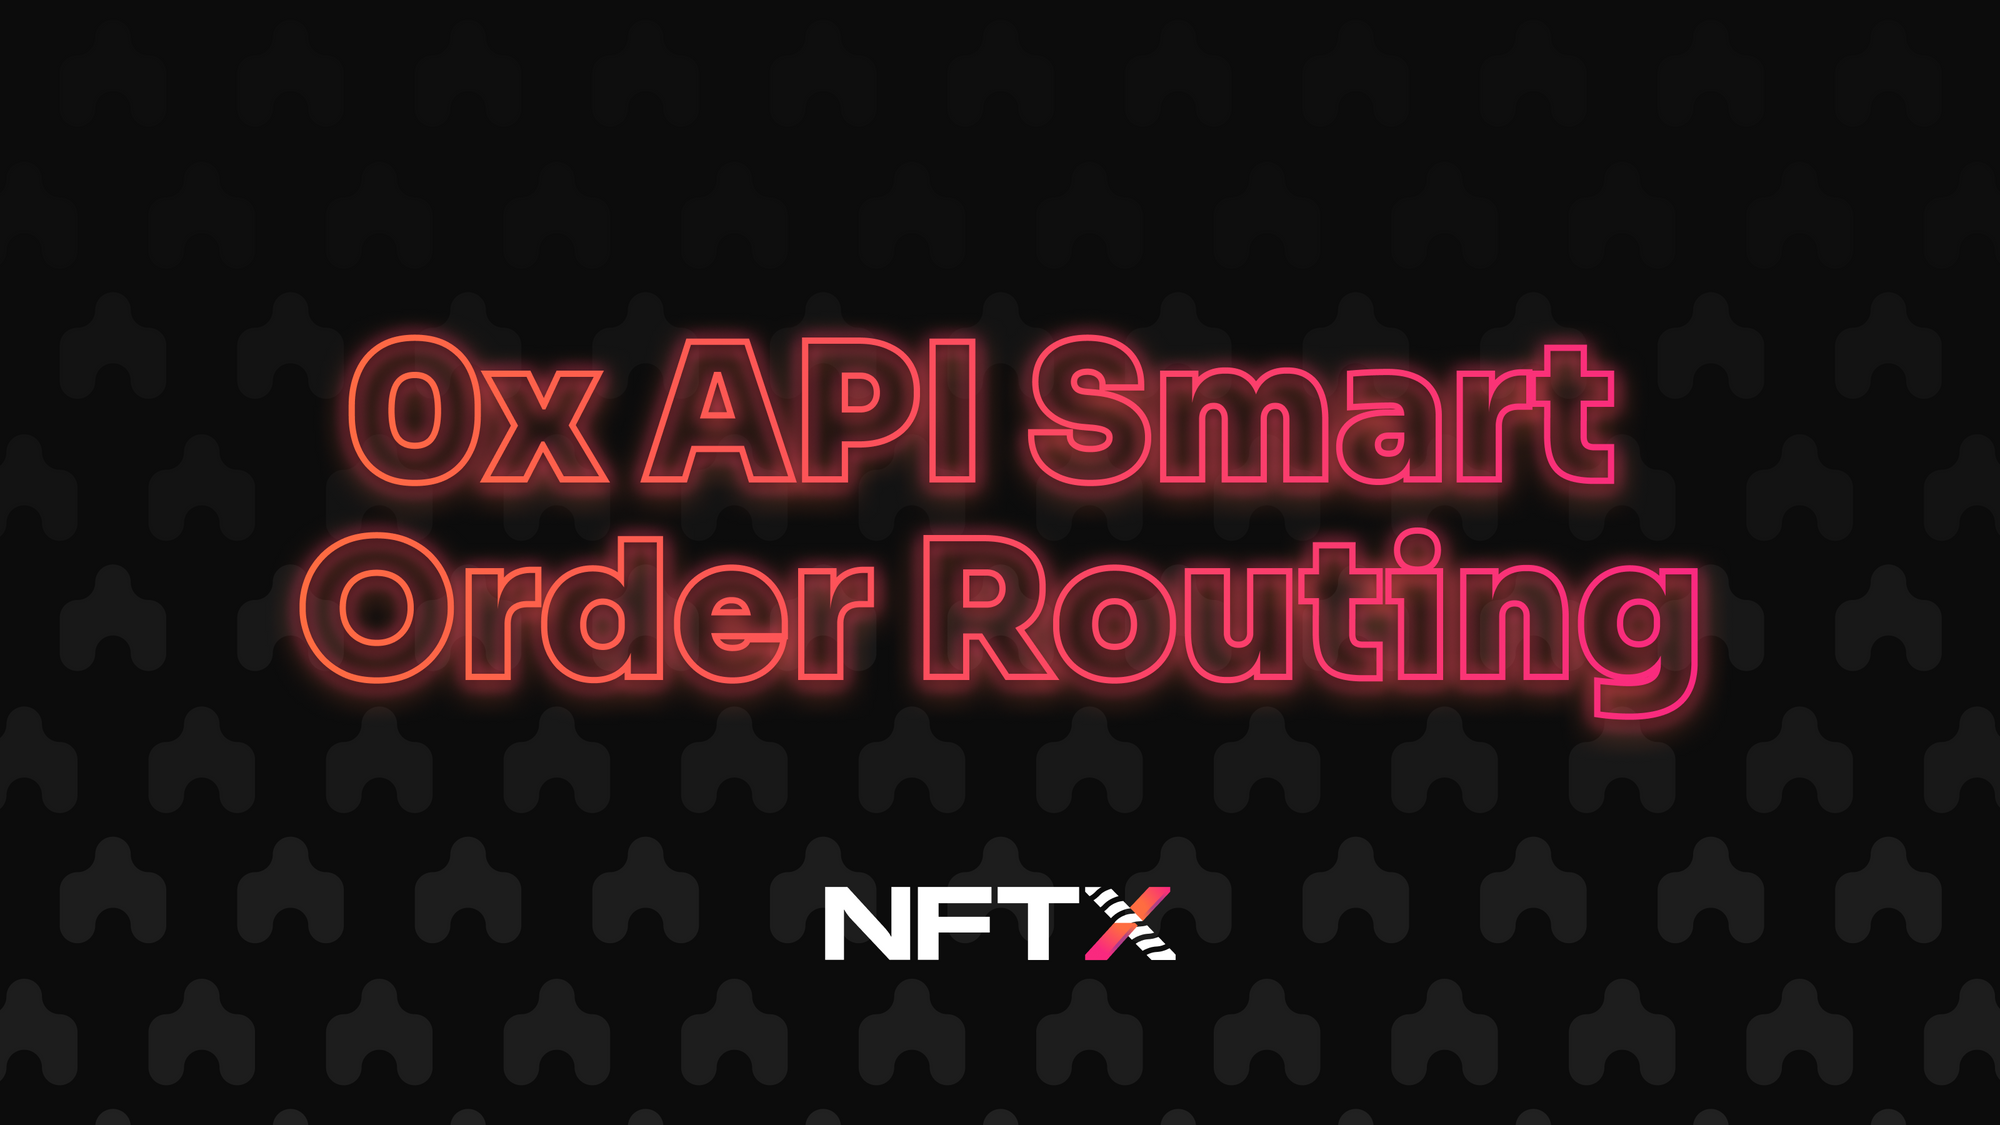 Introducing our latest product feature, 0x API’s Smart Order Routing!